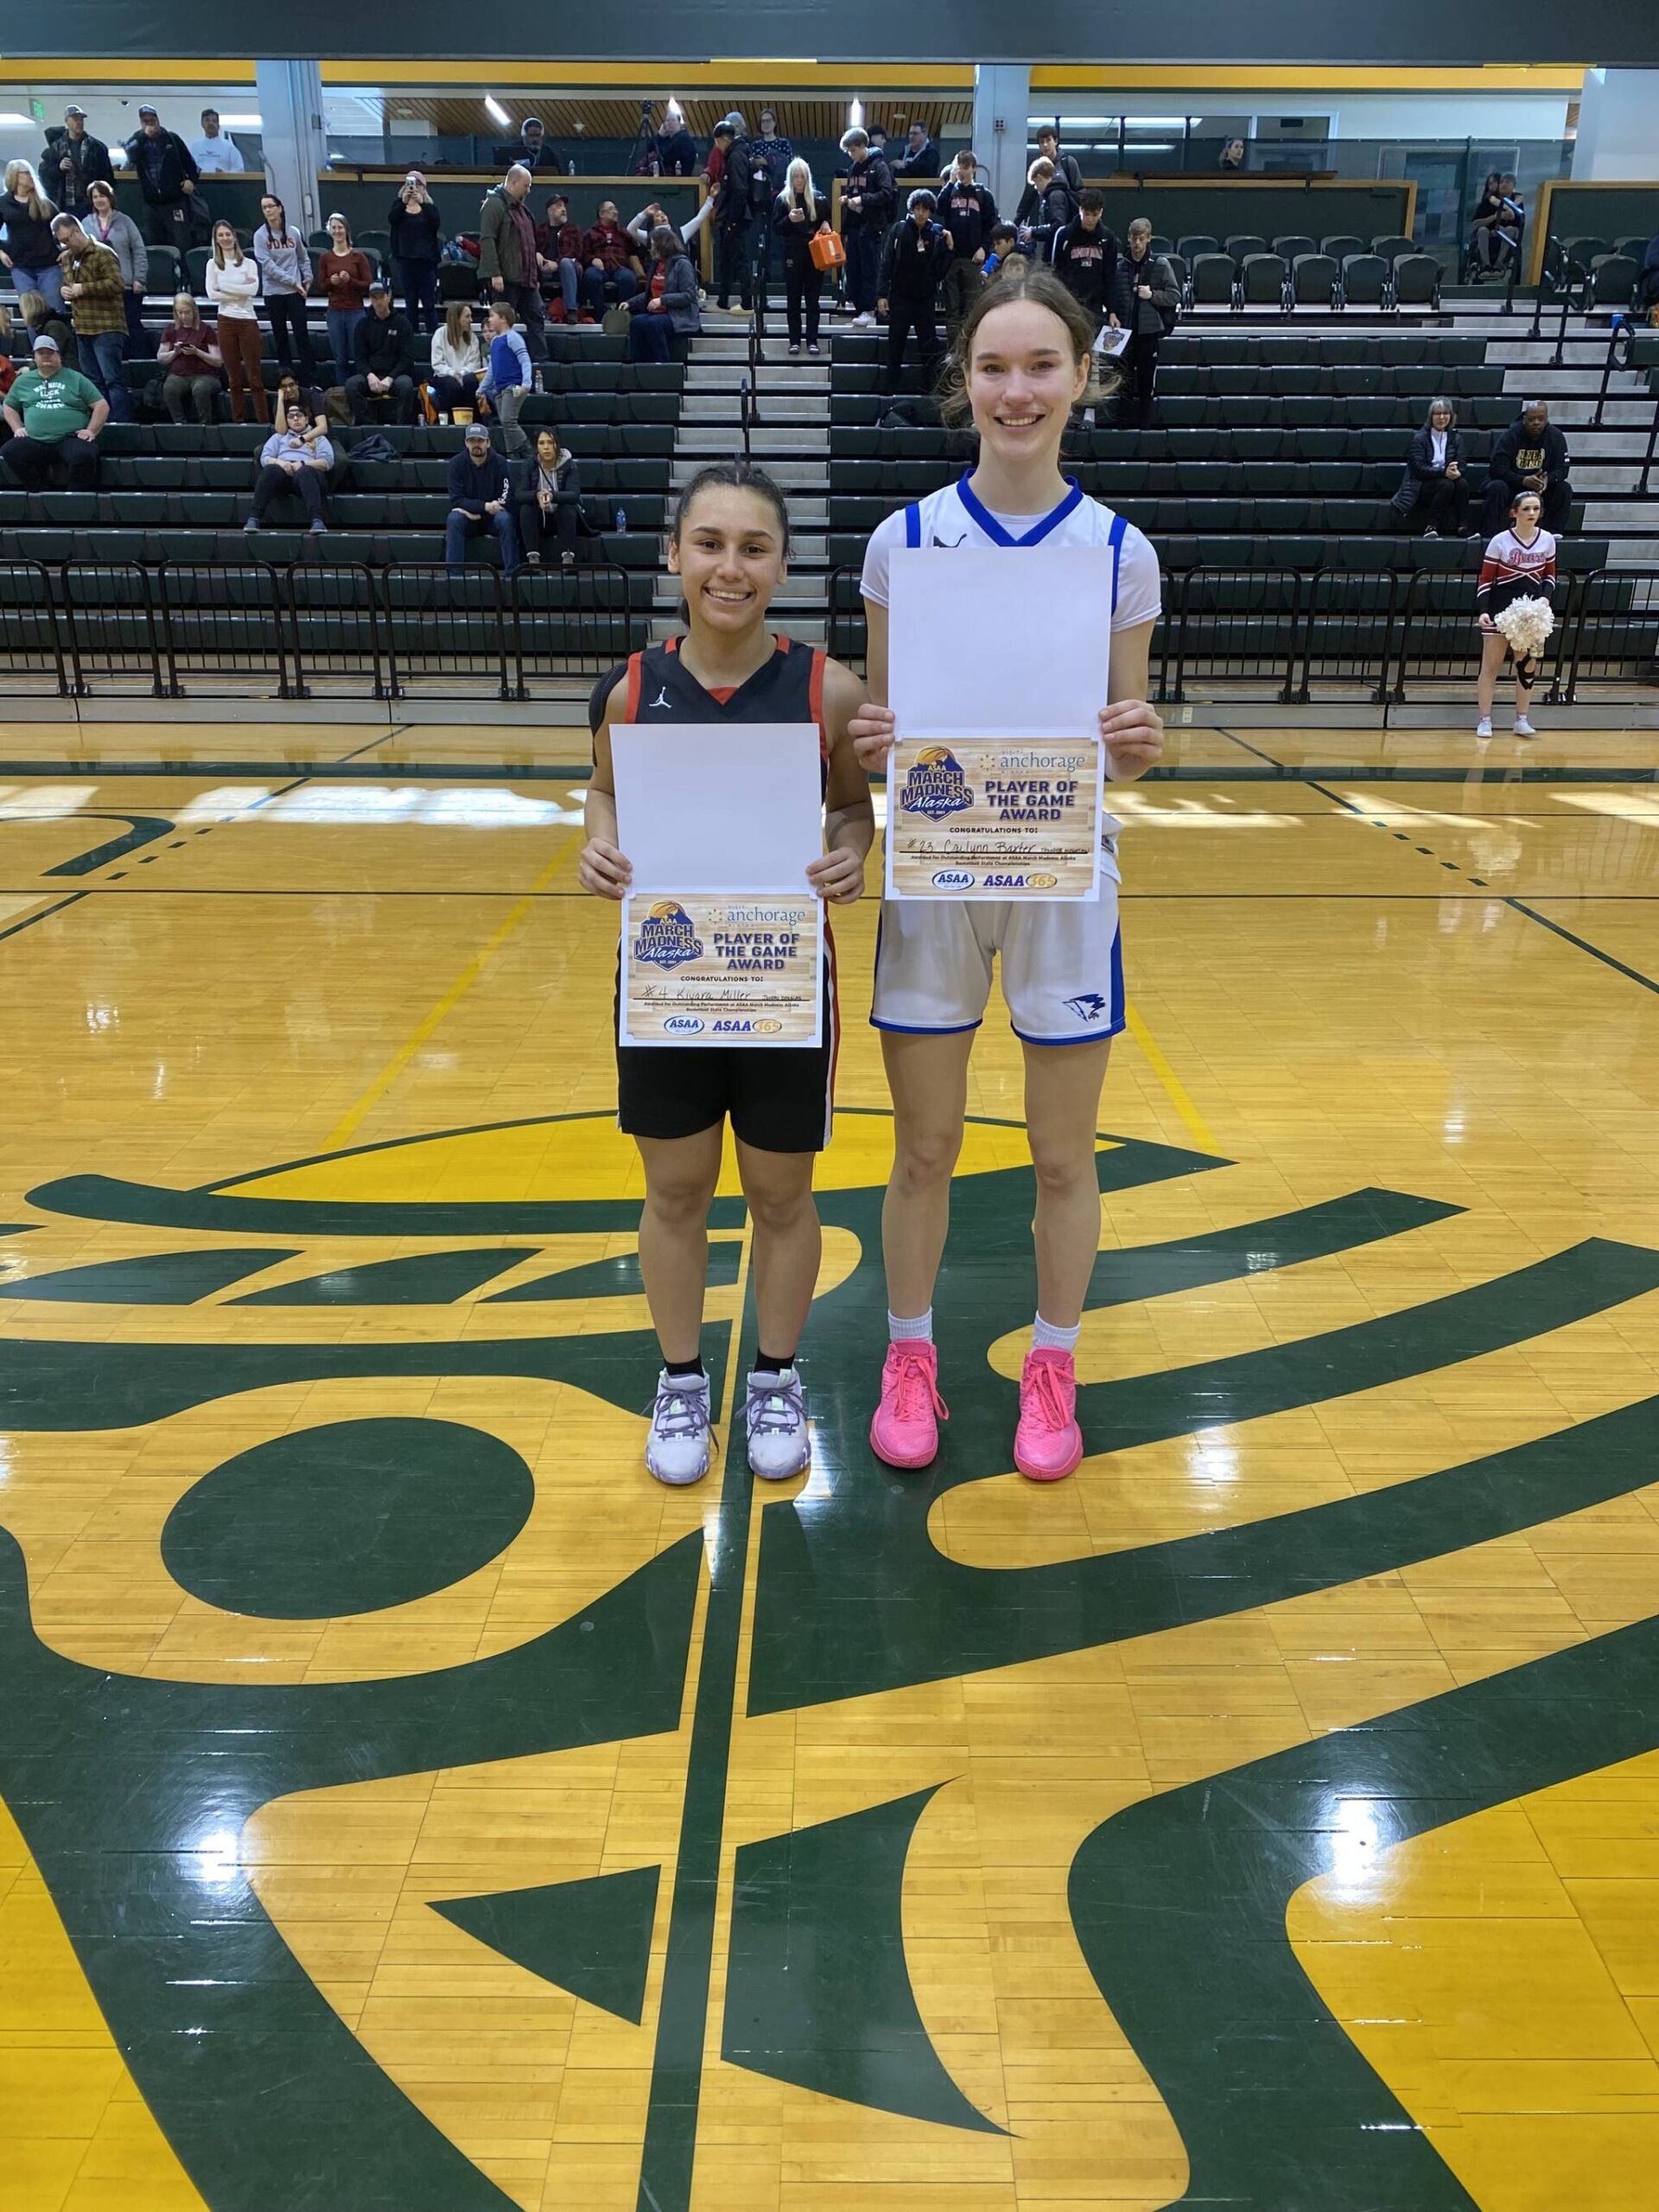 JDHS Kiyara Miller and TMHS Cailynn Baxter stand together for a photo after earning Player of the Game honors for their schools on Saturday after this year’s ASAA state competition in Anchorage. (Courtesy Photo / Tanya Nizich)